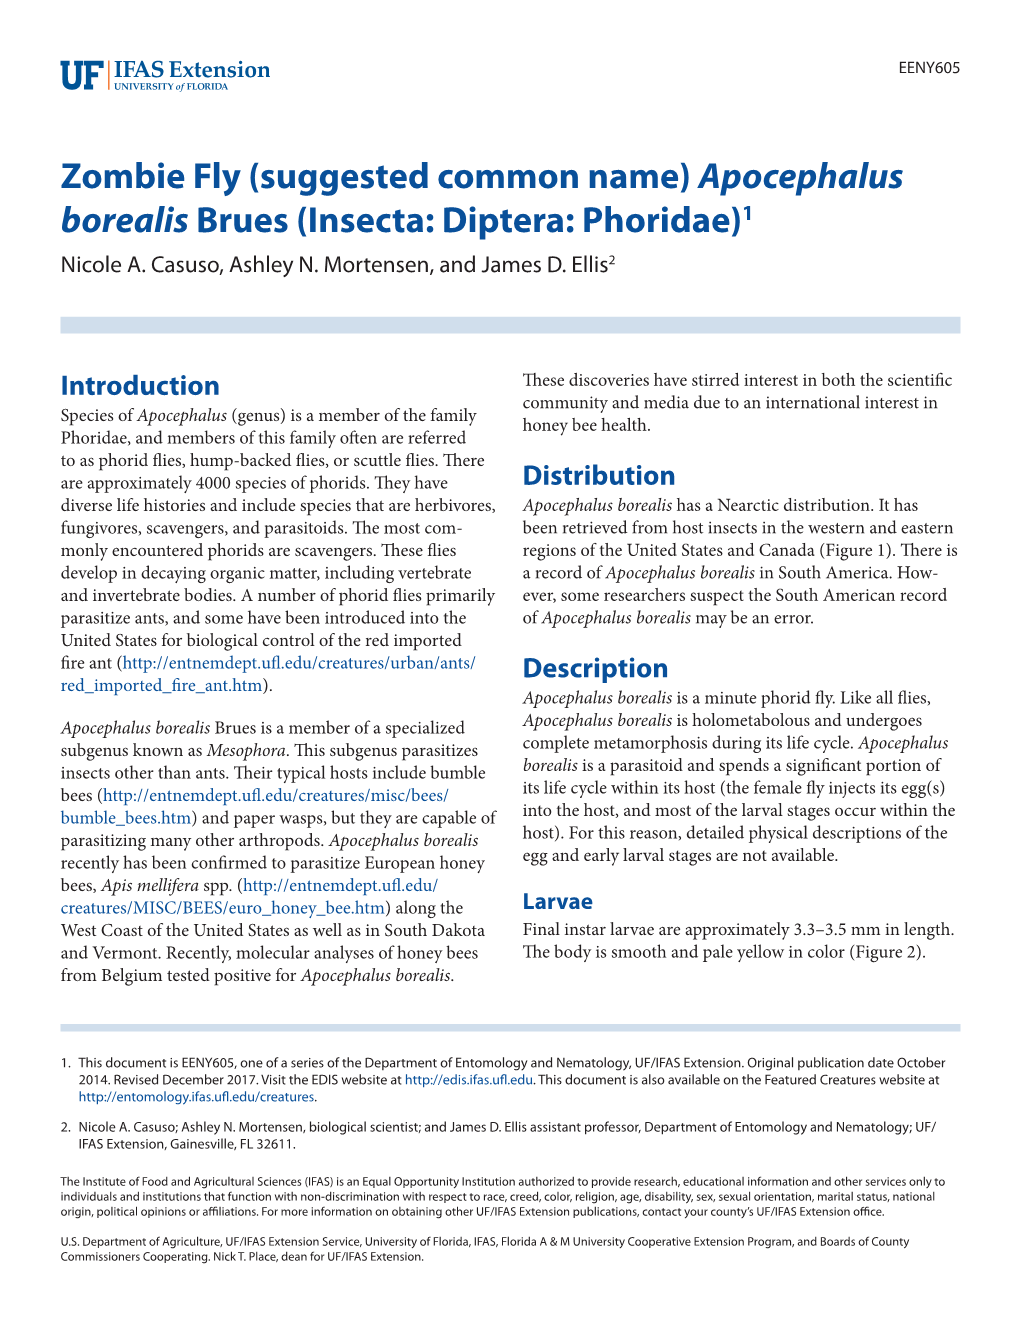 Zombie Fly (Suggested Common Name) Apocephalus Borealis Brues (Insecta: Diptera: Phoridae)1 Nicole A